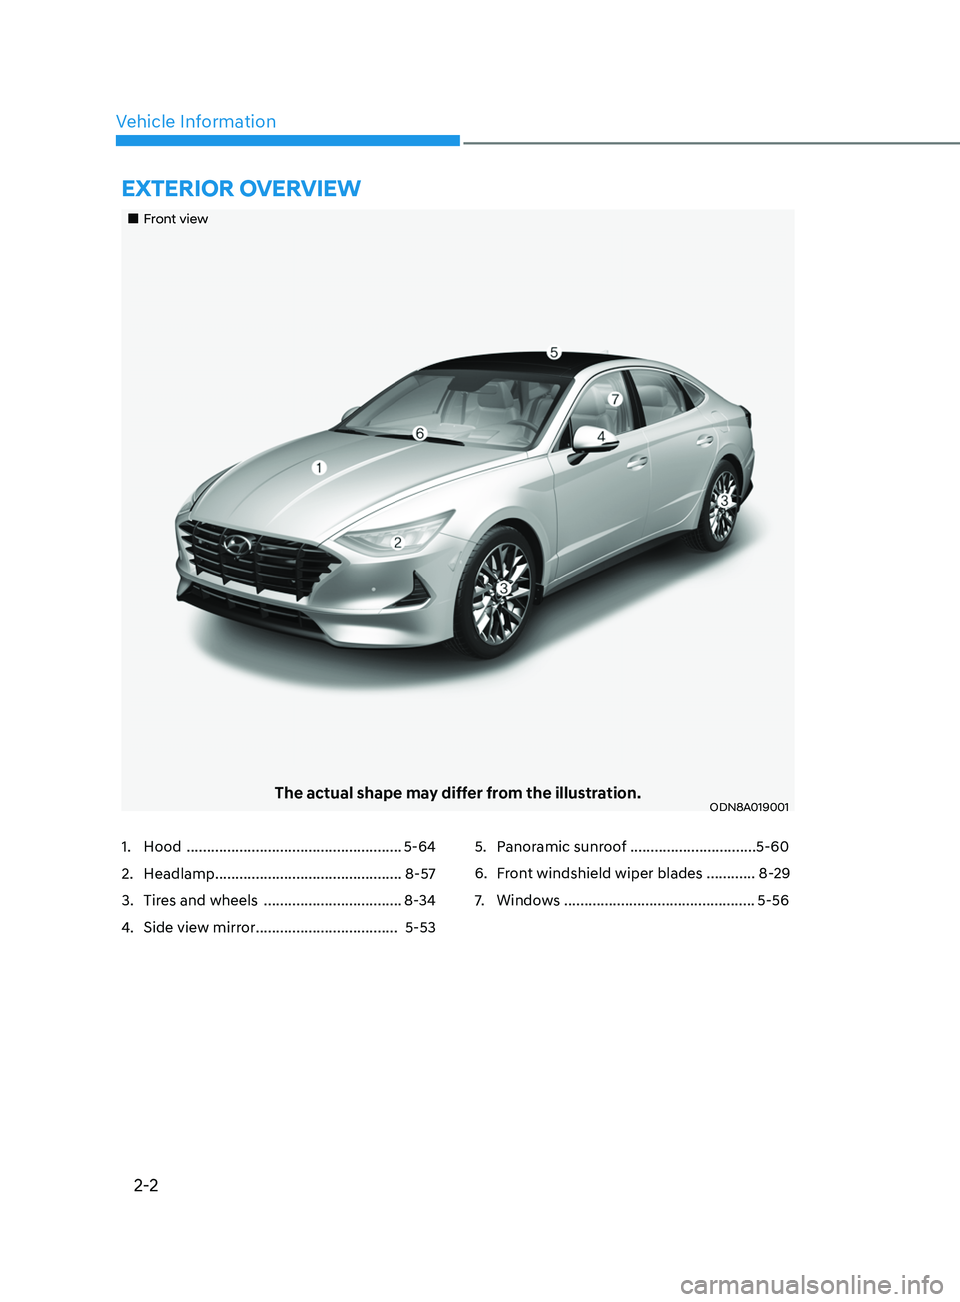 HYUNDAI SONATA LIMITED 2020 User Guide 2-2
Vehicle Information
ExtErior ovE rvi E w
„„Front view
The actual shape may differ from the illustration.ODN8A019001
1. Hood  ..................................................... 5-64
2.